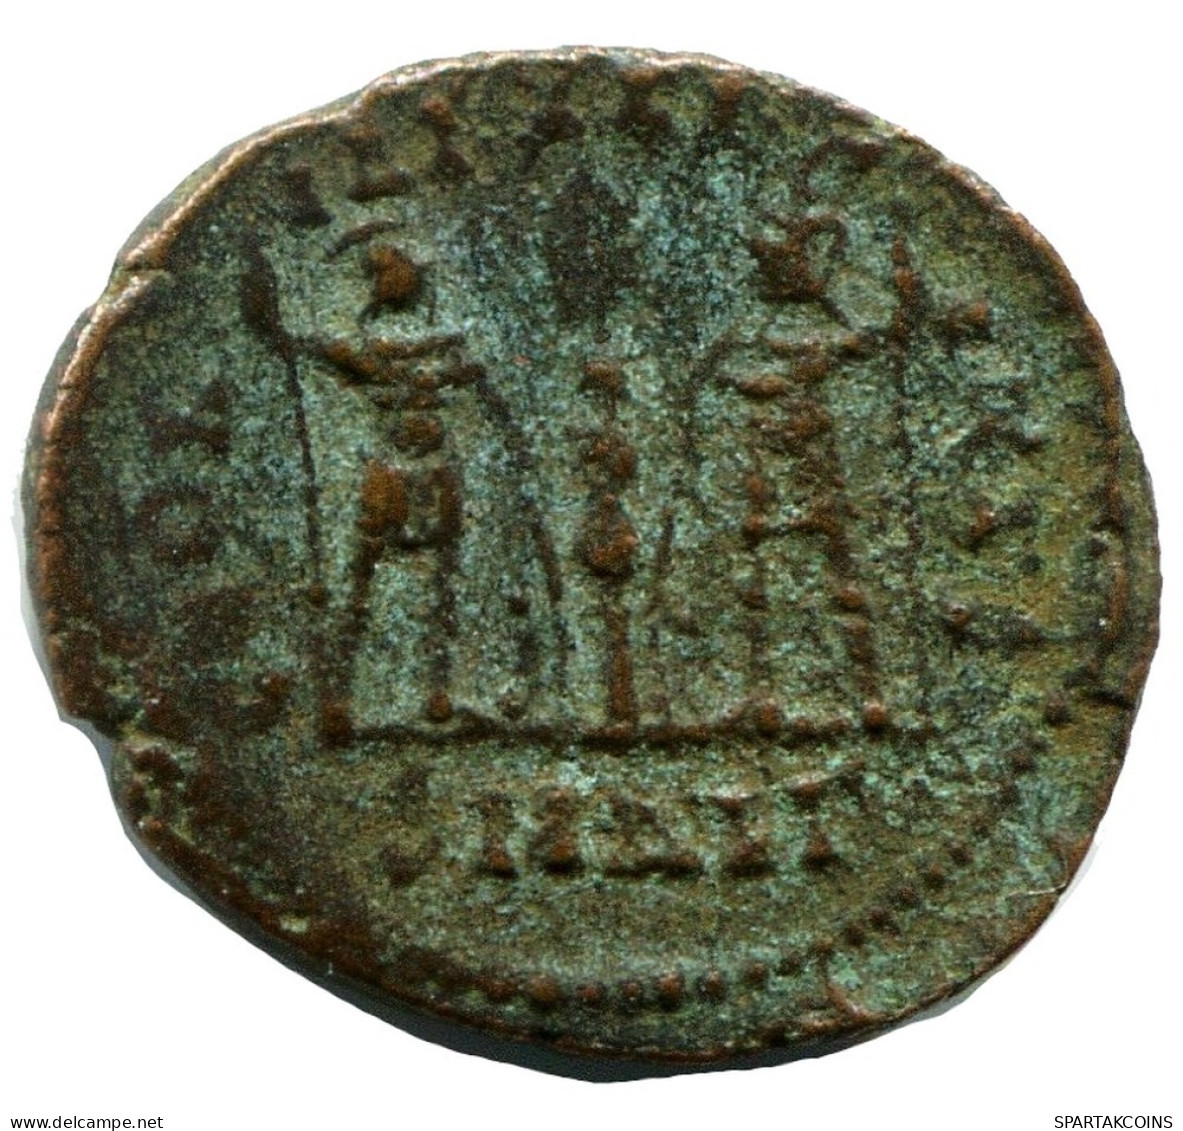 CONSTANS MINTED IN ALEKSANDRIA FOUND IN IHNASYAH HOARD EGYPT #ANC11460.14.U.A - The Christian Empire (307 AD To 363 AD)